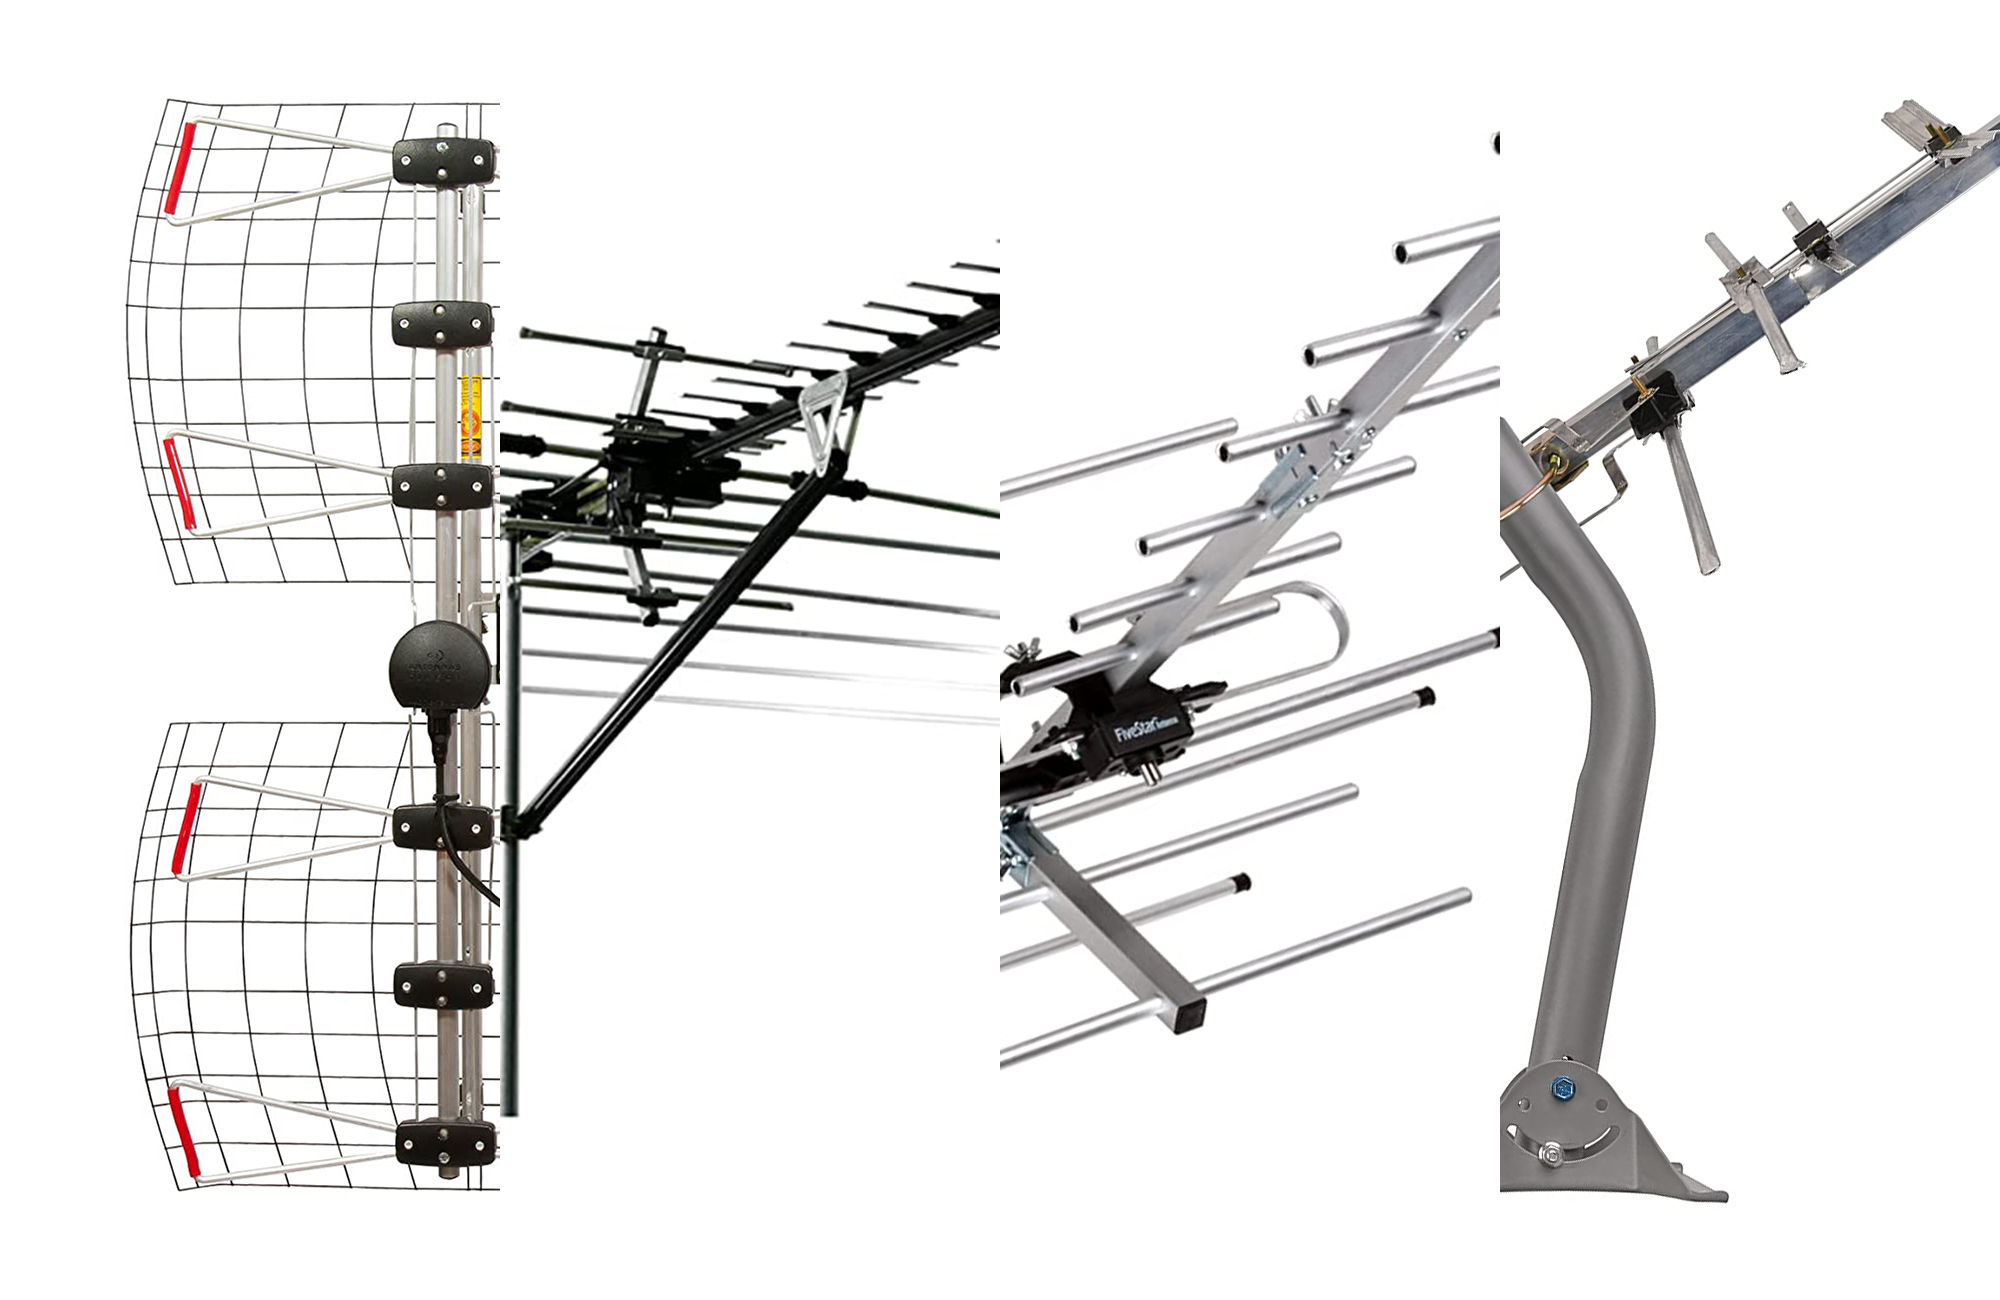 The best TV antennas for rural areas to get live television